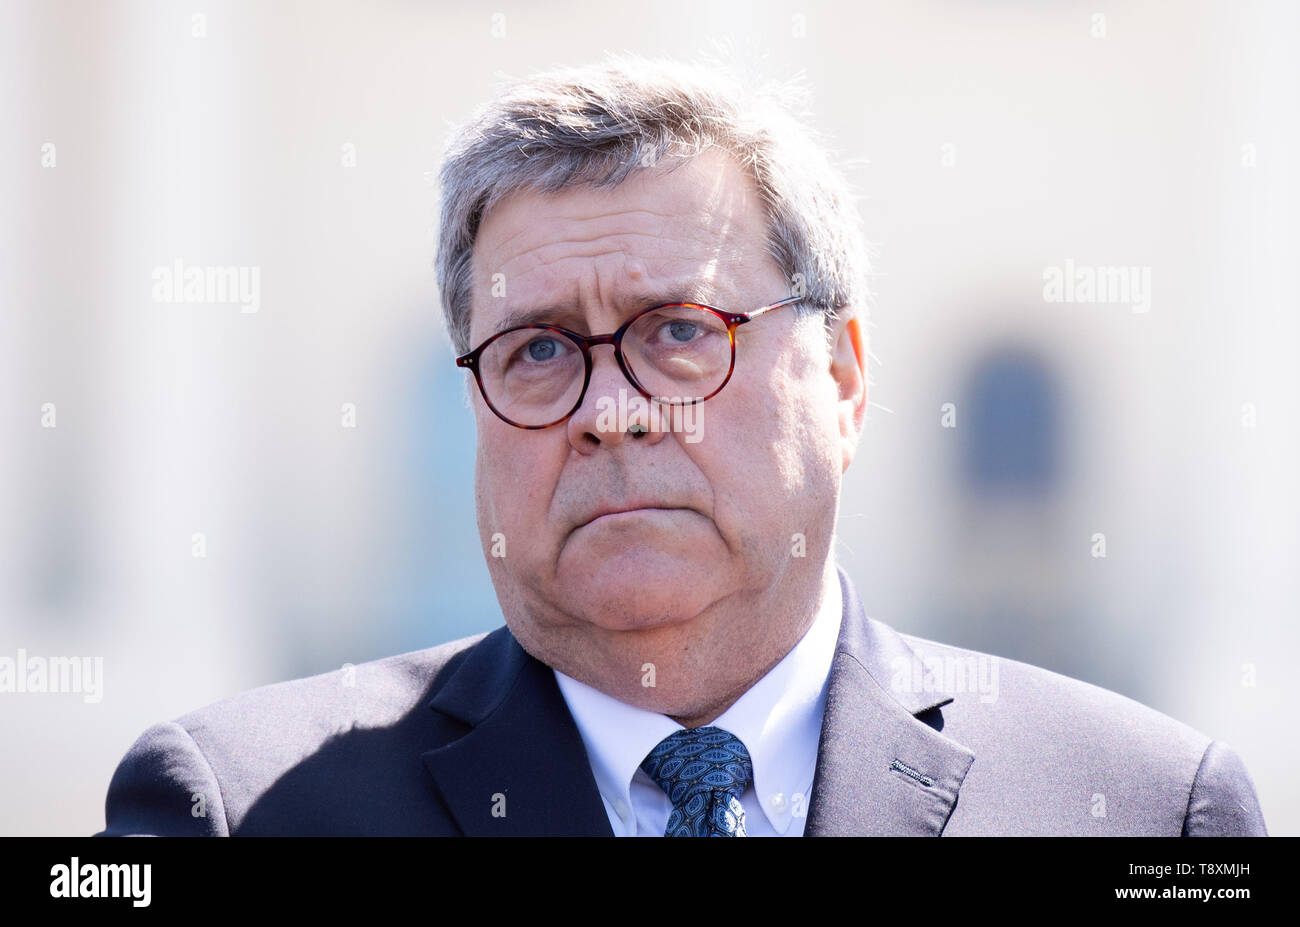 United States Attorney General William P. Barr attends the 38th annual National Peace Officers' Memorial Service, at the U.S. Capitol in Washington, DC on May 15, 2019. Credit: Kevin Dietsch/Pool via CNP /MediaPunch Stock Photo